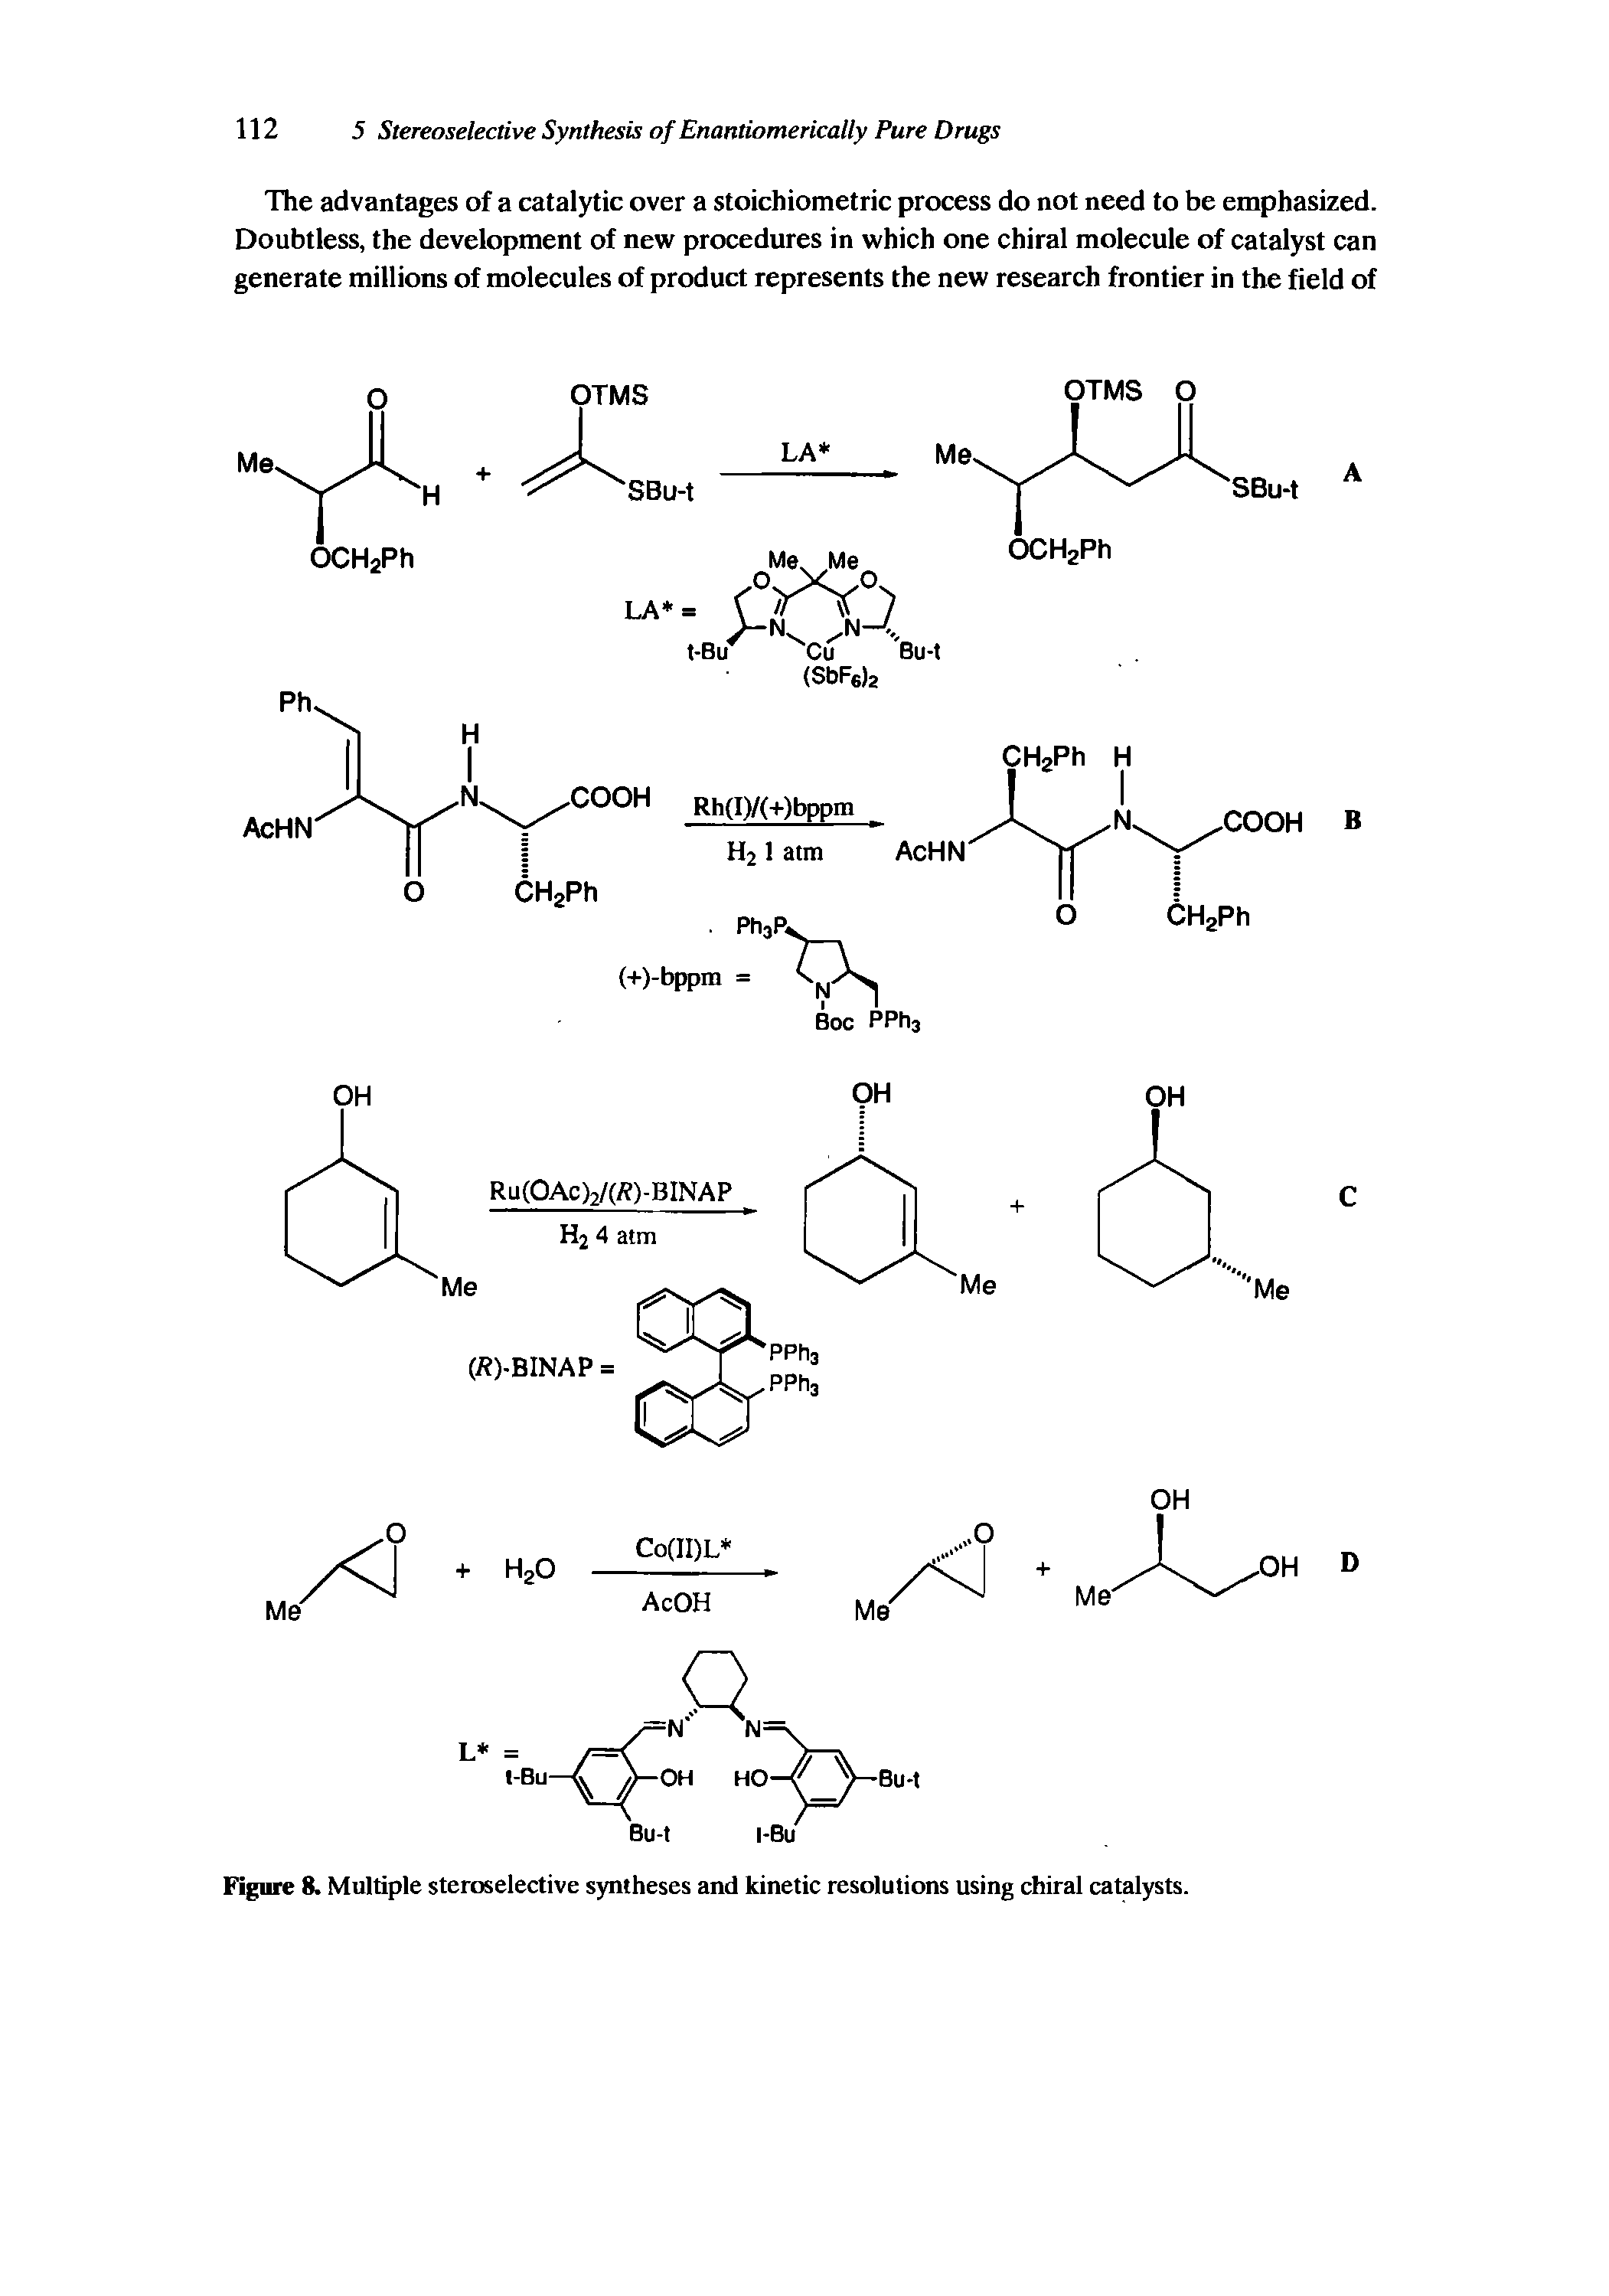 Figure 8. Multiple steroselective syntheses and kinetic resolutions using chiral catalysts.